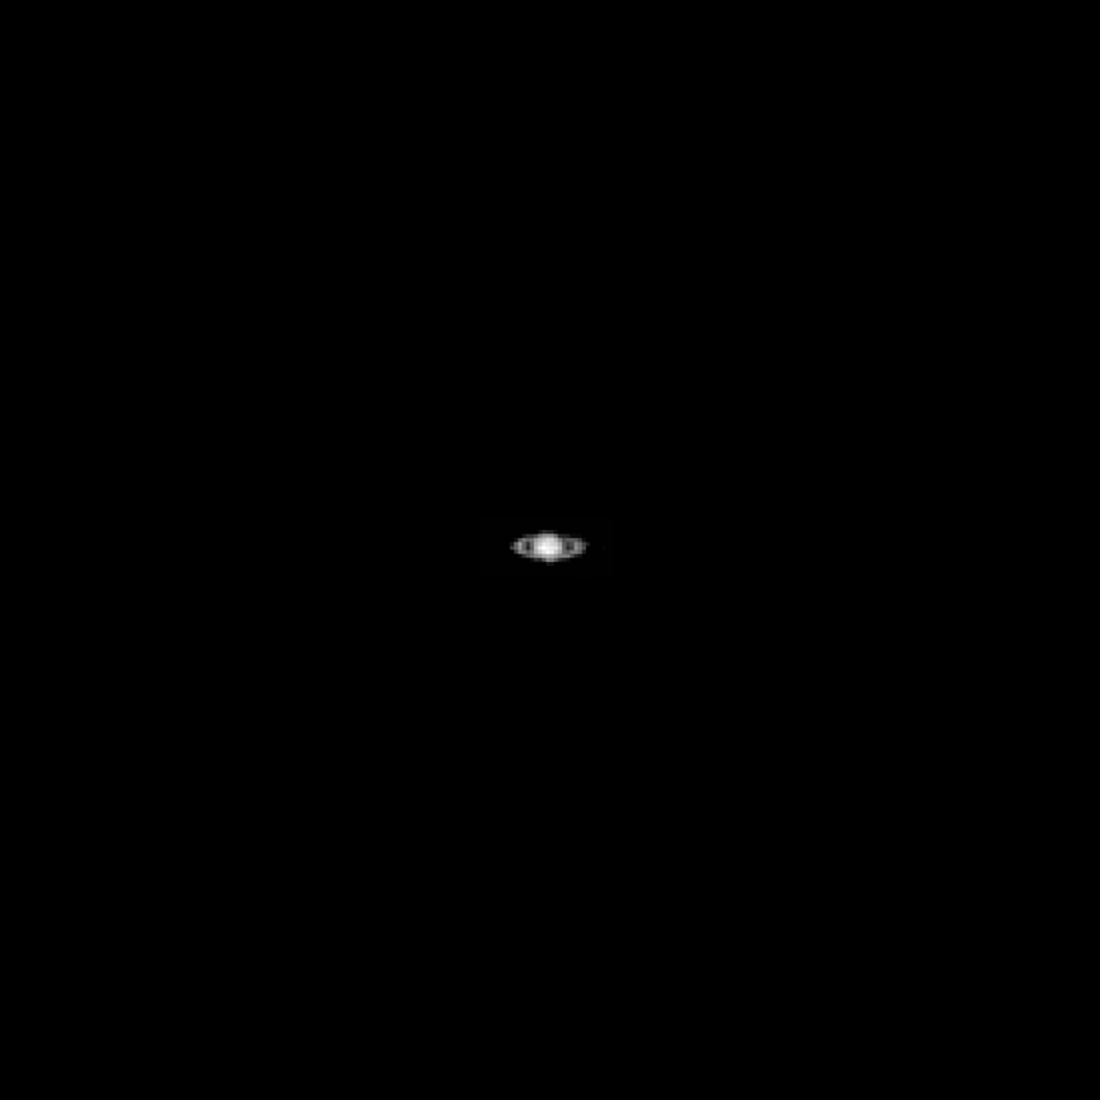 Mainly black image with small greyscale saturn in the center.